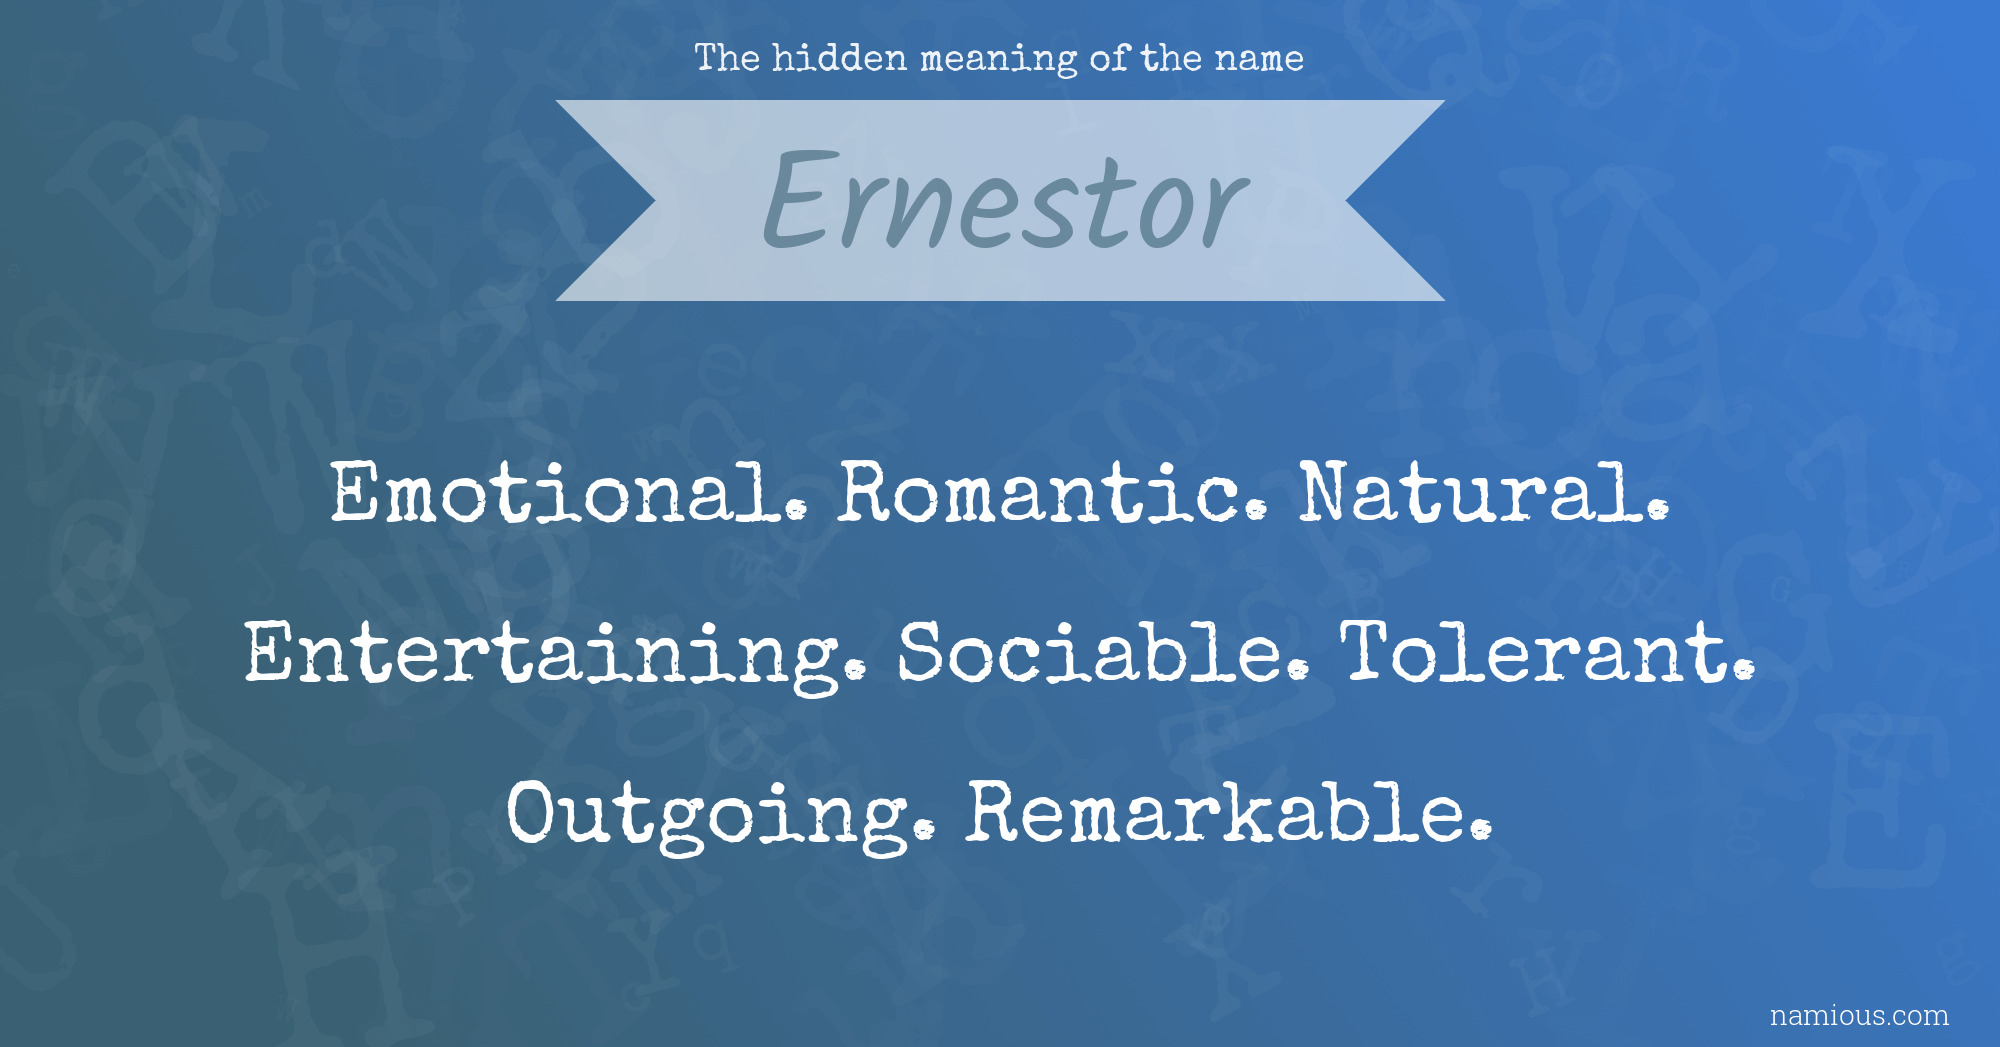 The hidden meaning of the name Ernestor